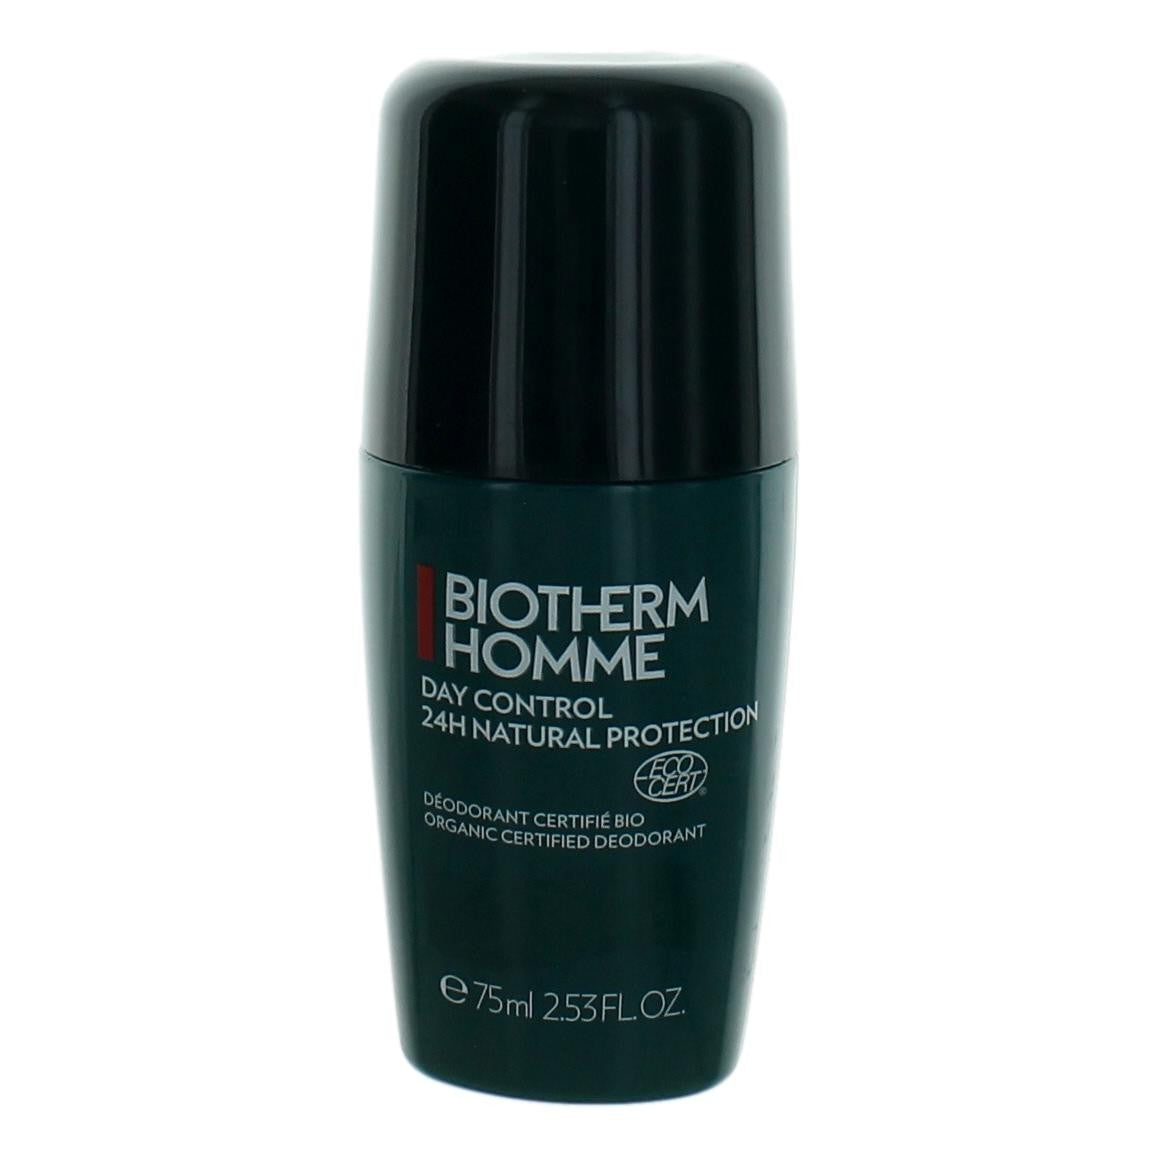 Biotherm Homme Day Control 24H Natural Protection by Biotherm